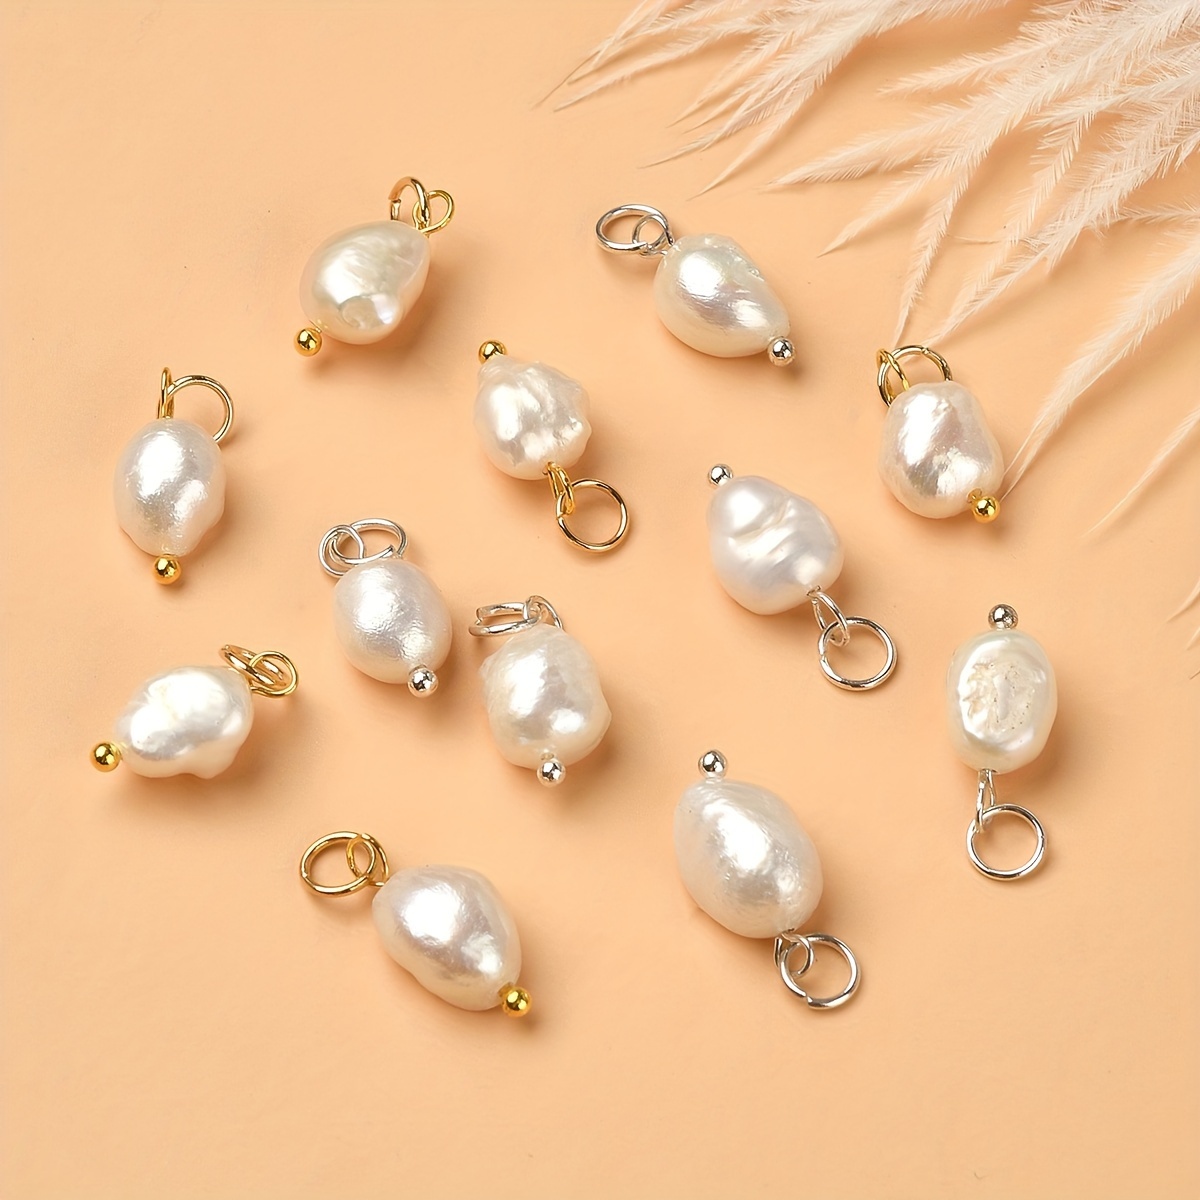 

12pcs Irregular Natural Freshwater Pearl Pendants For Diy Earrings, Necklaces, And Small Pendants Suitable For Diy Earrings, Bracelets, And Necklaces Jewelry Making